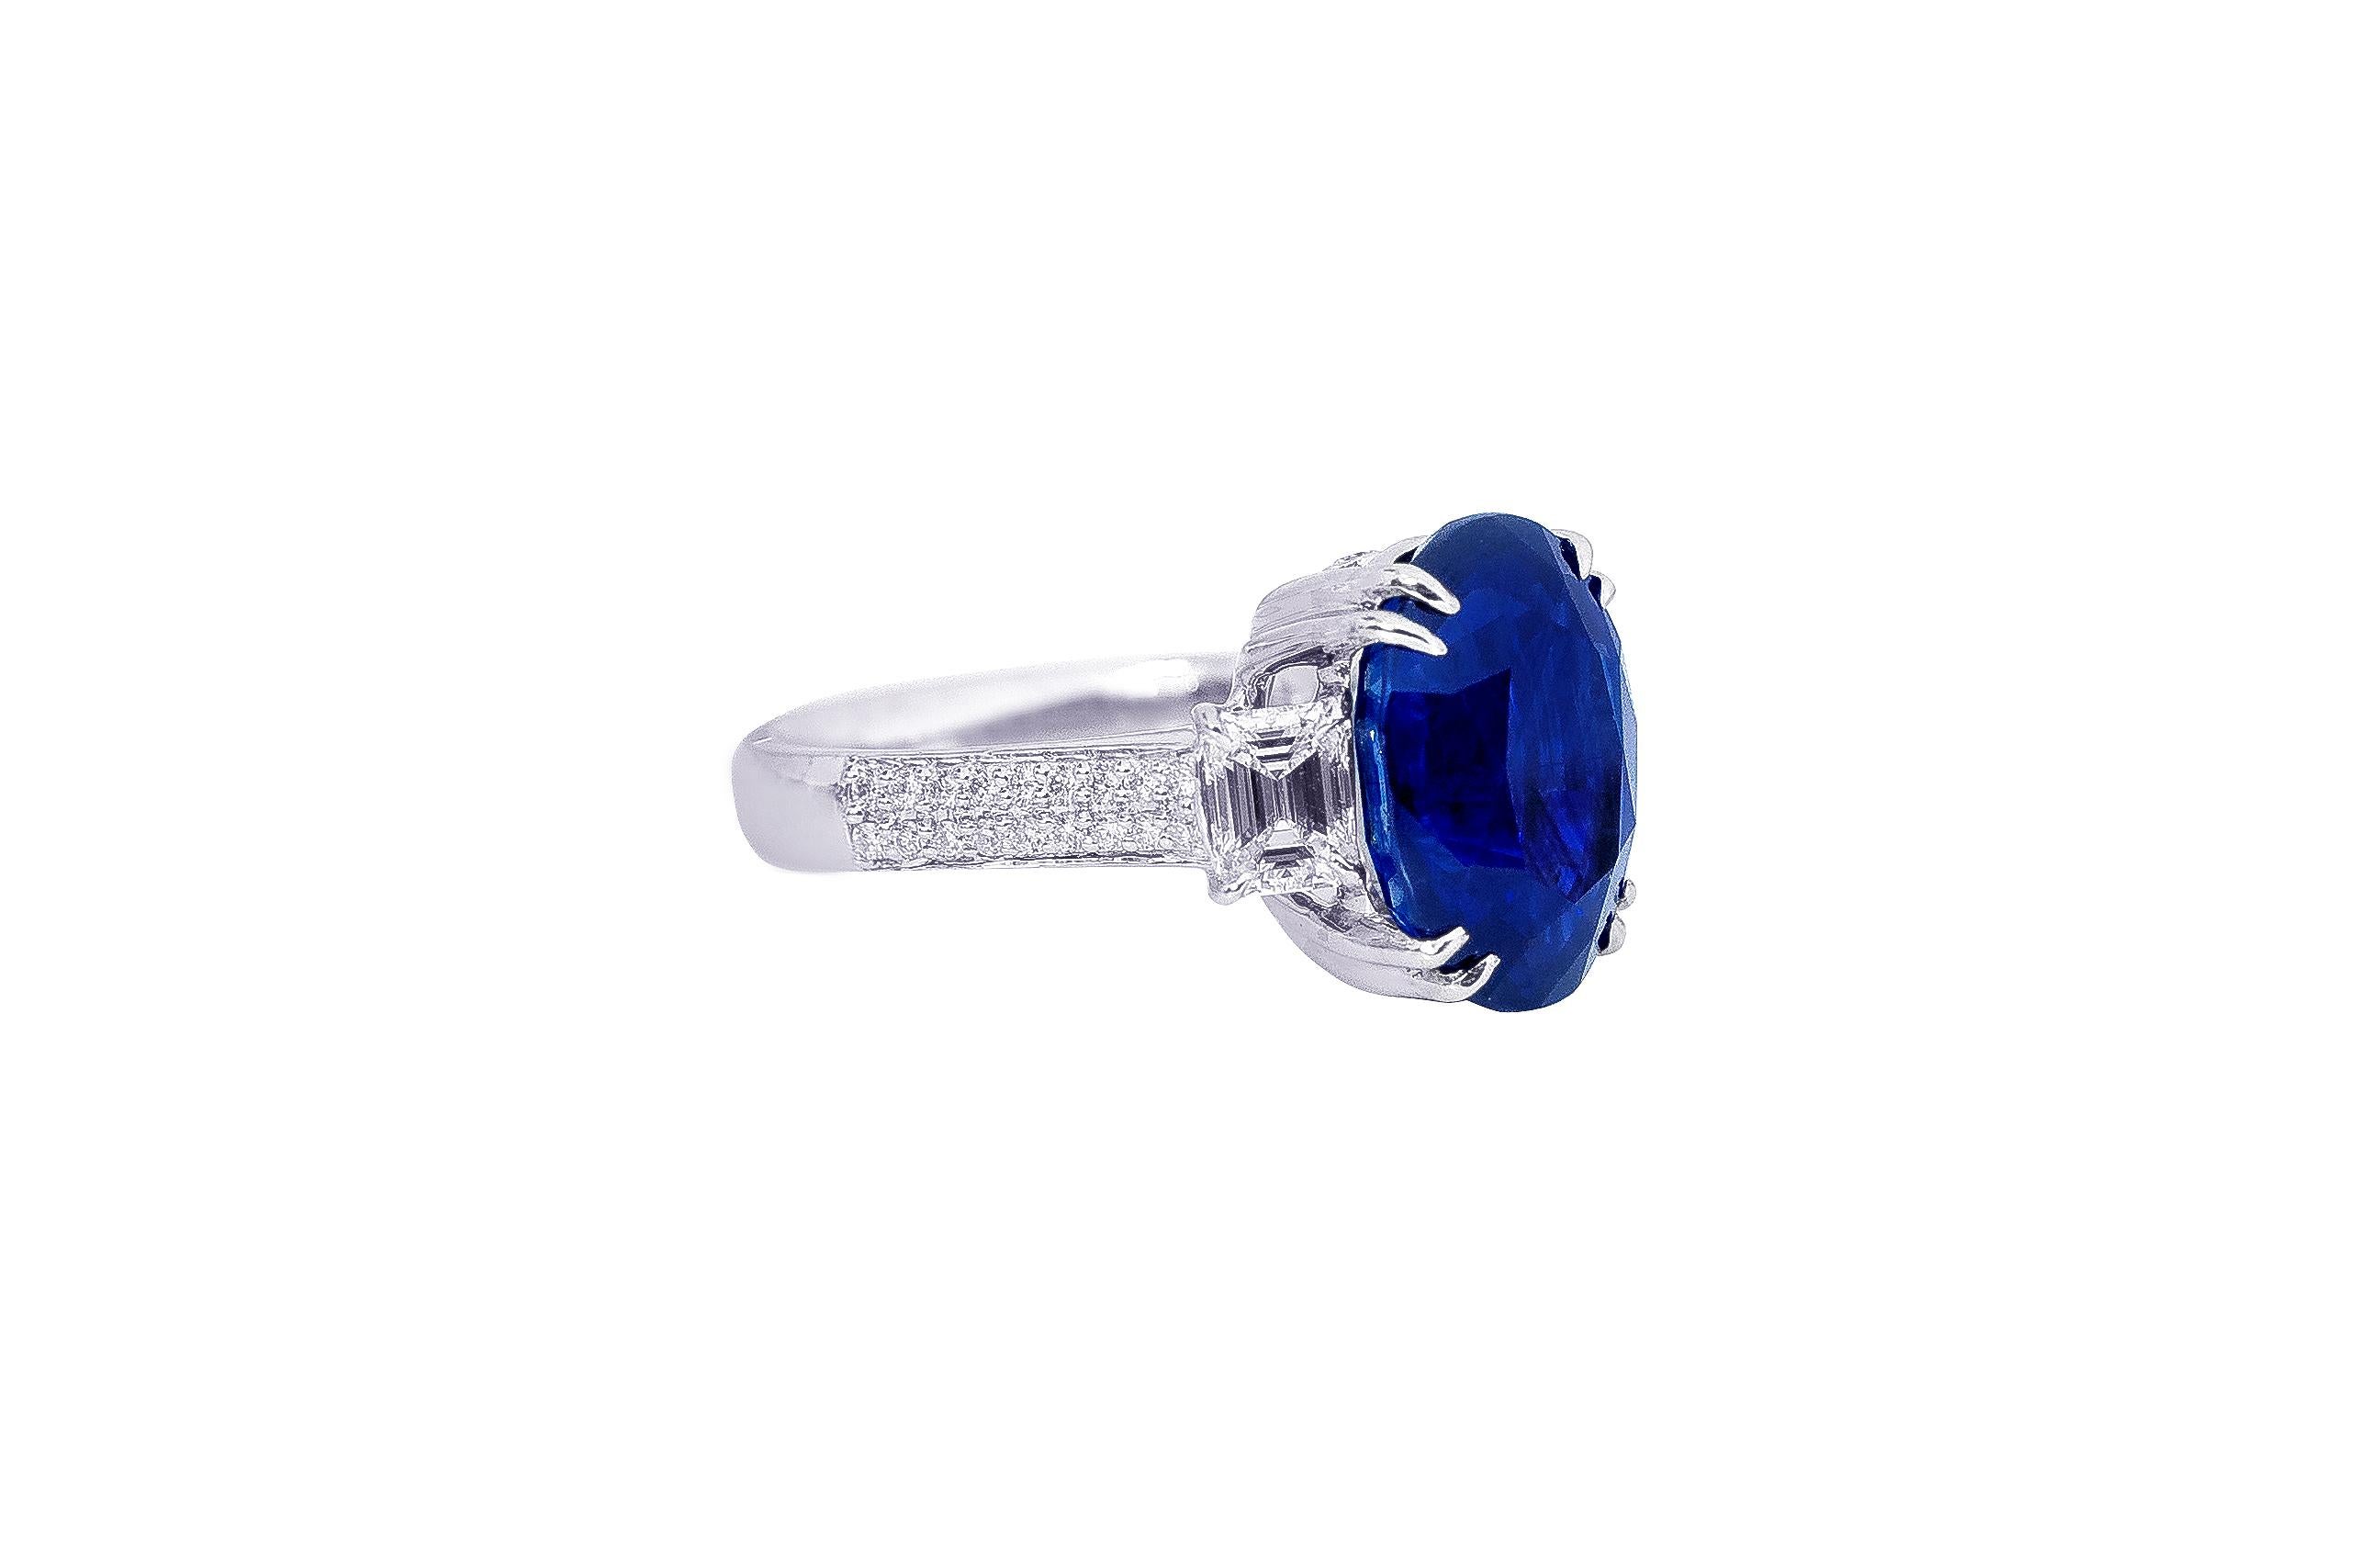 GIA Certified 8.90 Carat Royal Blue Sapphire Cocktail Ring in 18 Karat Gold

This glorious trinity royal blue sapphire and diamond ring is sensational. The three-stone trinity ring tells a story by not only representing the said “past, present, and